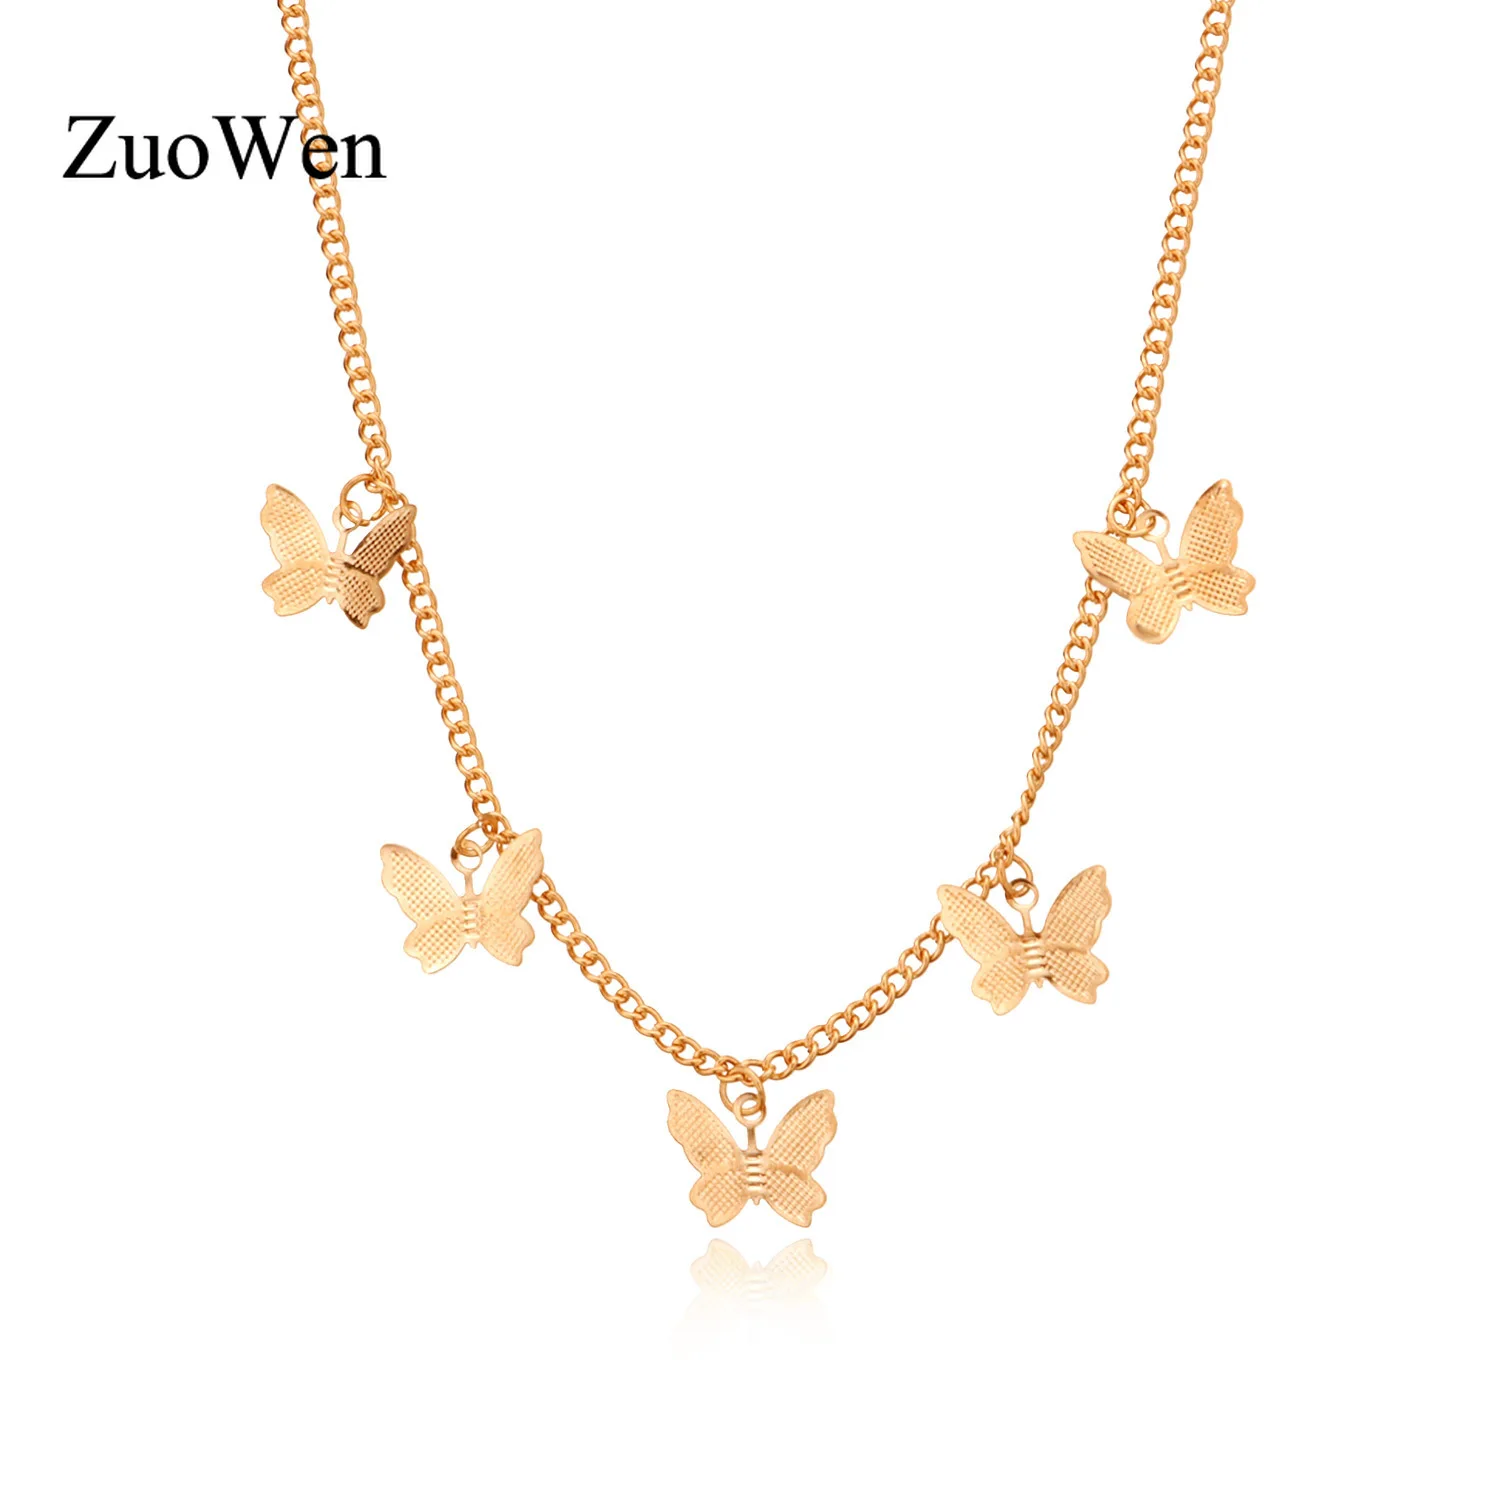 

9 Styles Cute Butterfly Choker Necklace For Women Gold Chain Statement Collar Female Clavicle Chain Chocker Best Shining Jewelry